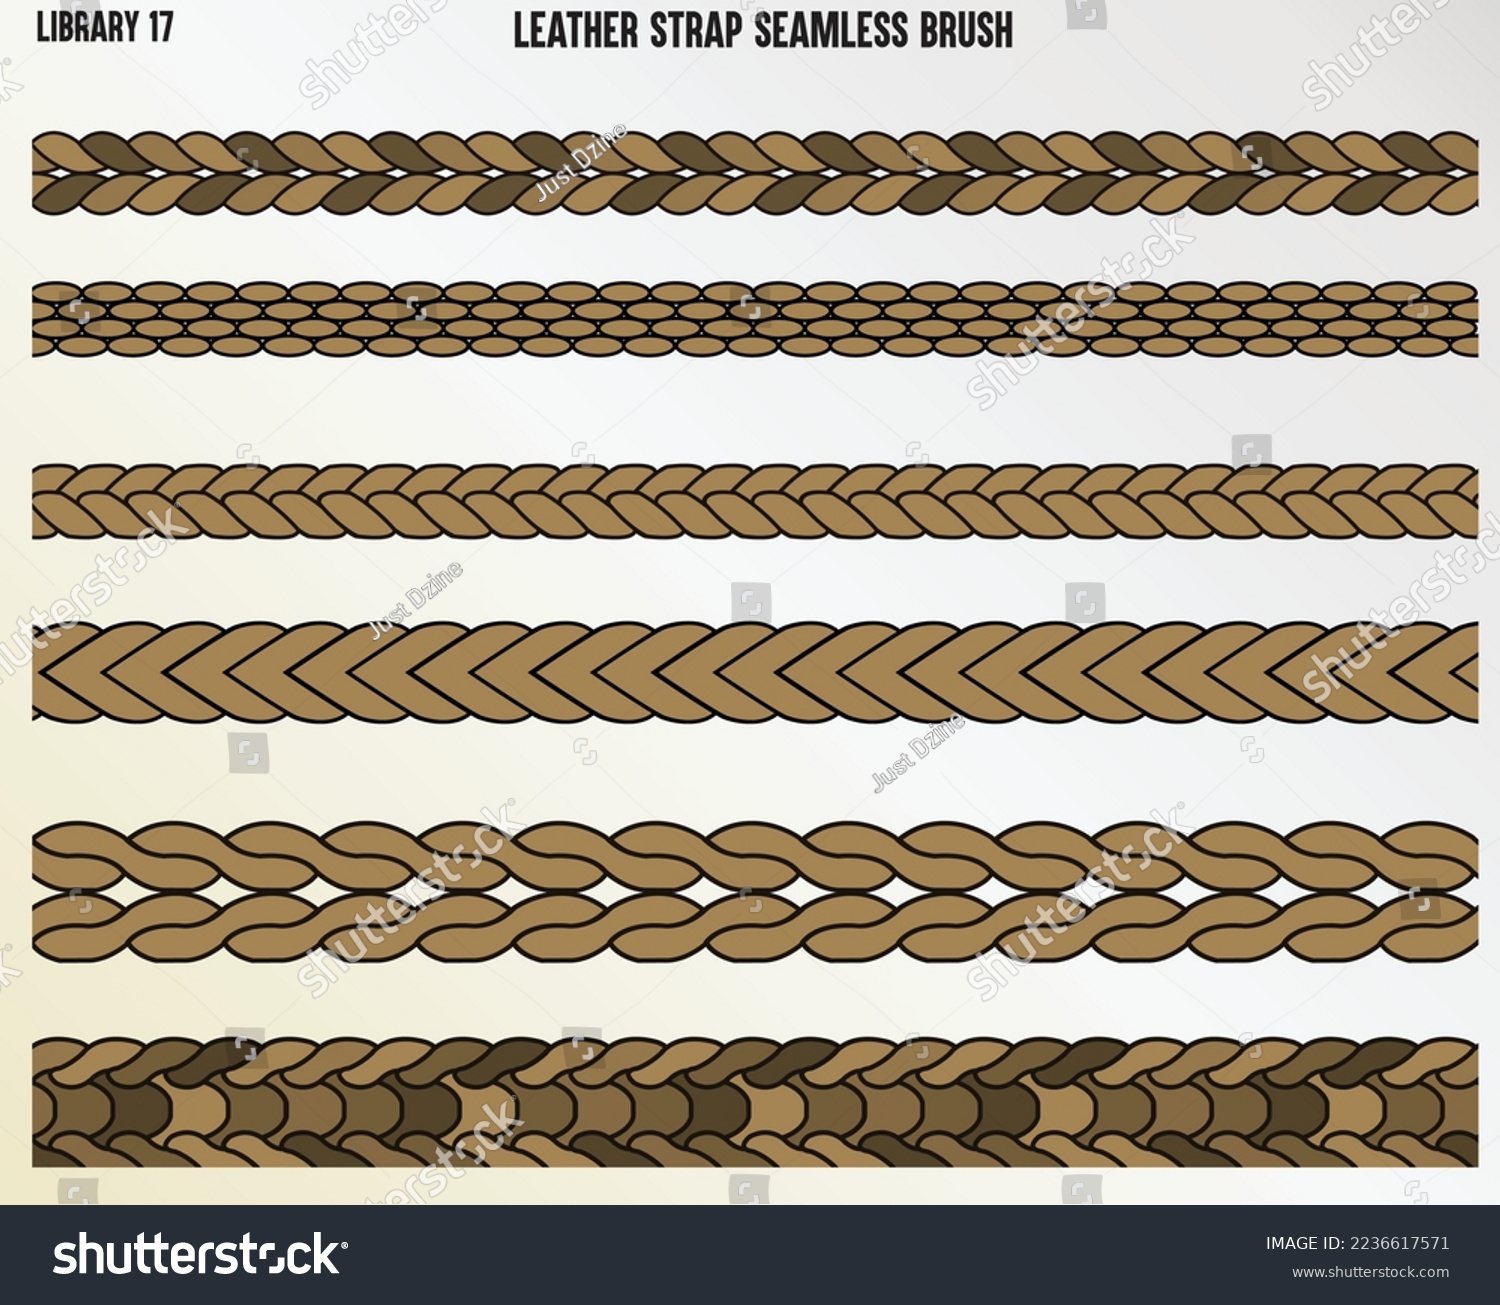 SVG of LEATHER BRAIDED STRAP ACCESSORIES VECTOR SKETCH svg